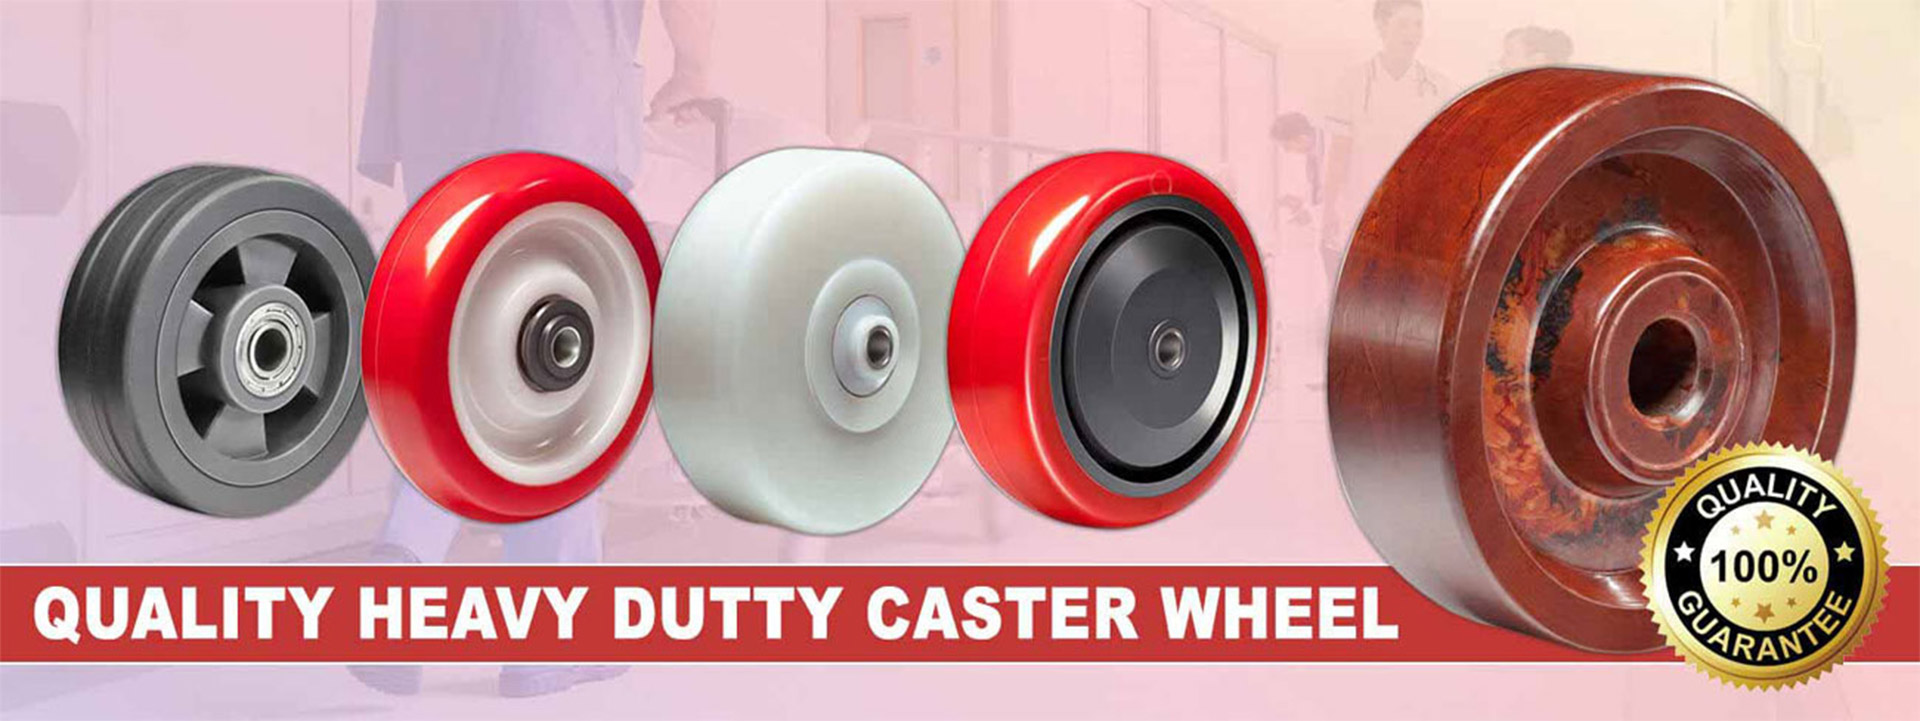 Caster-Wheels-Manufacturer-and-Supplier-in-Ahmedabad